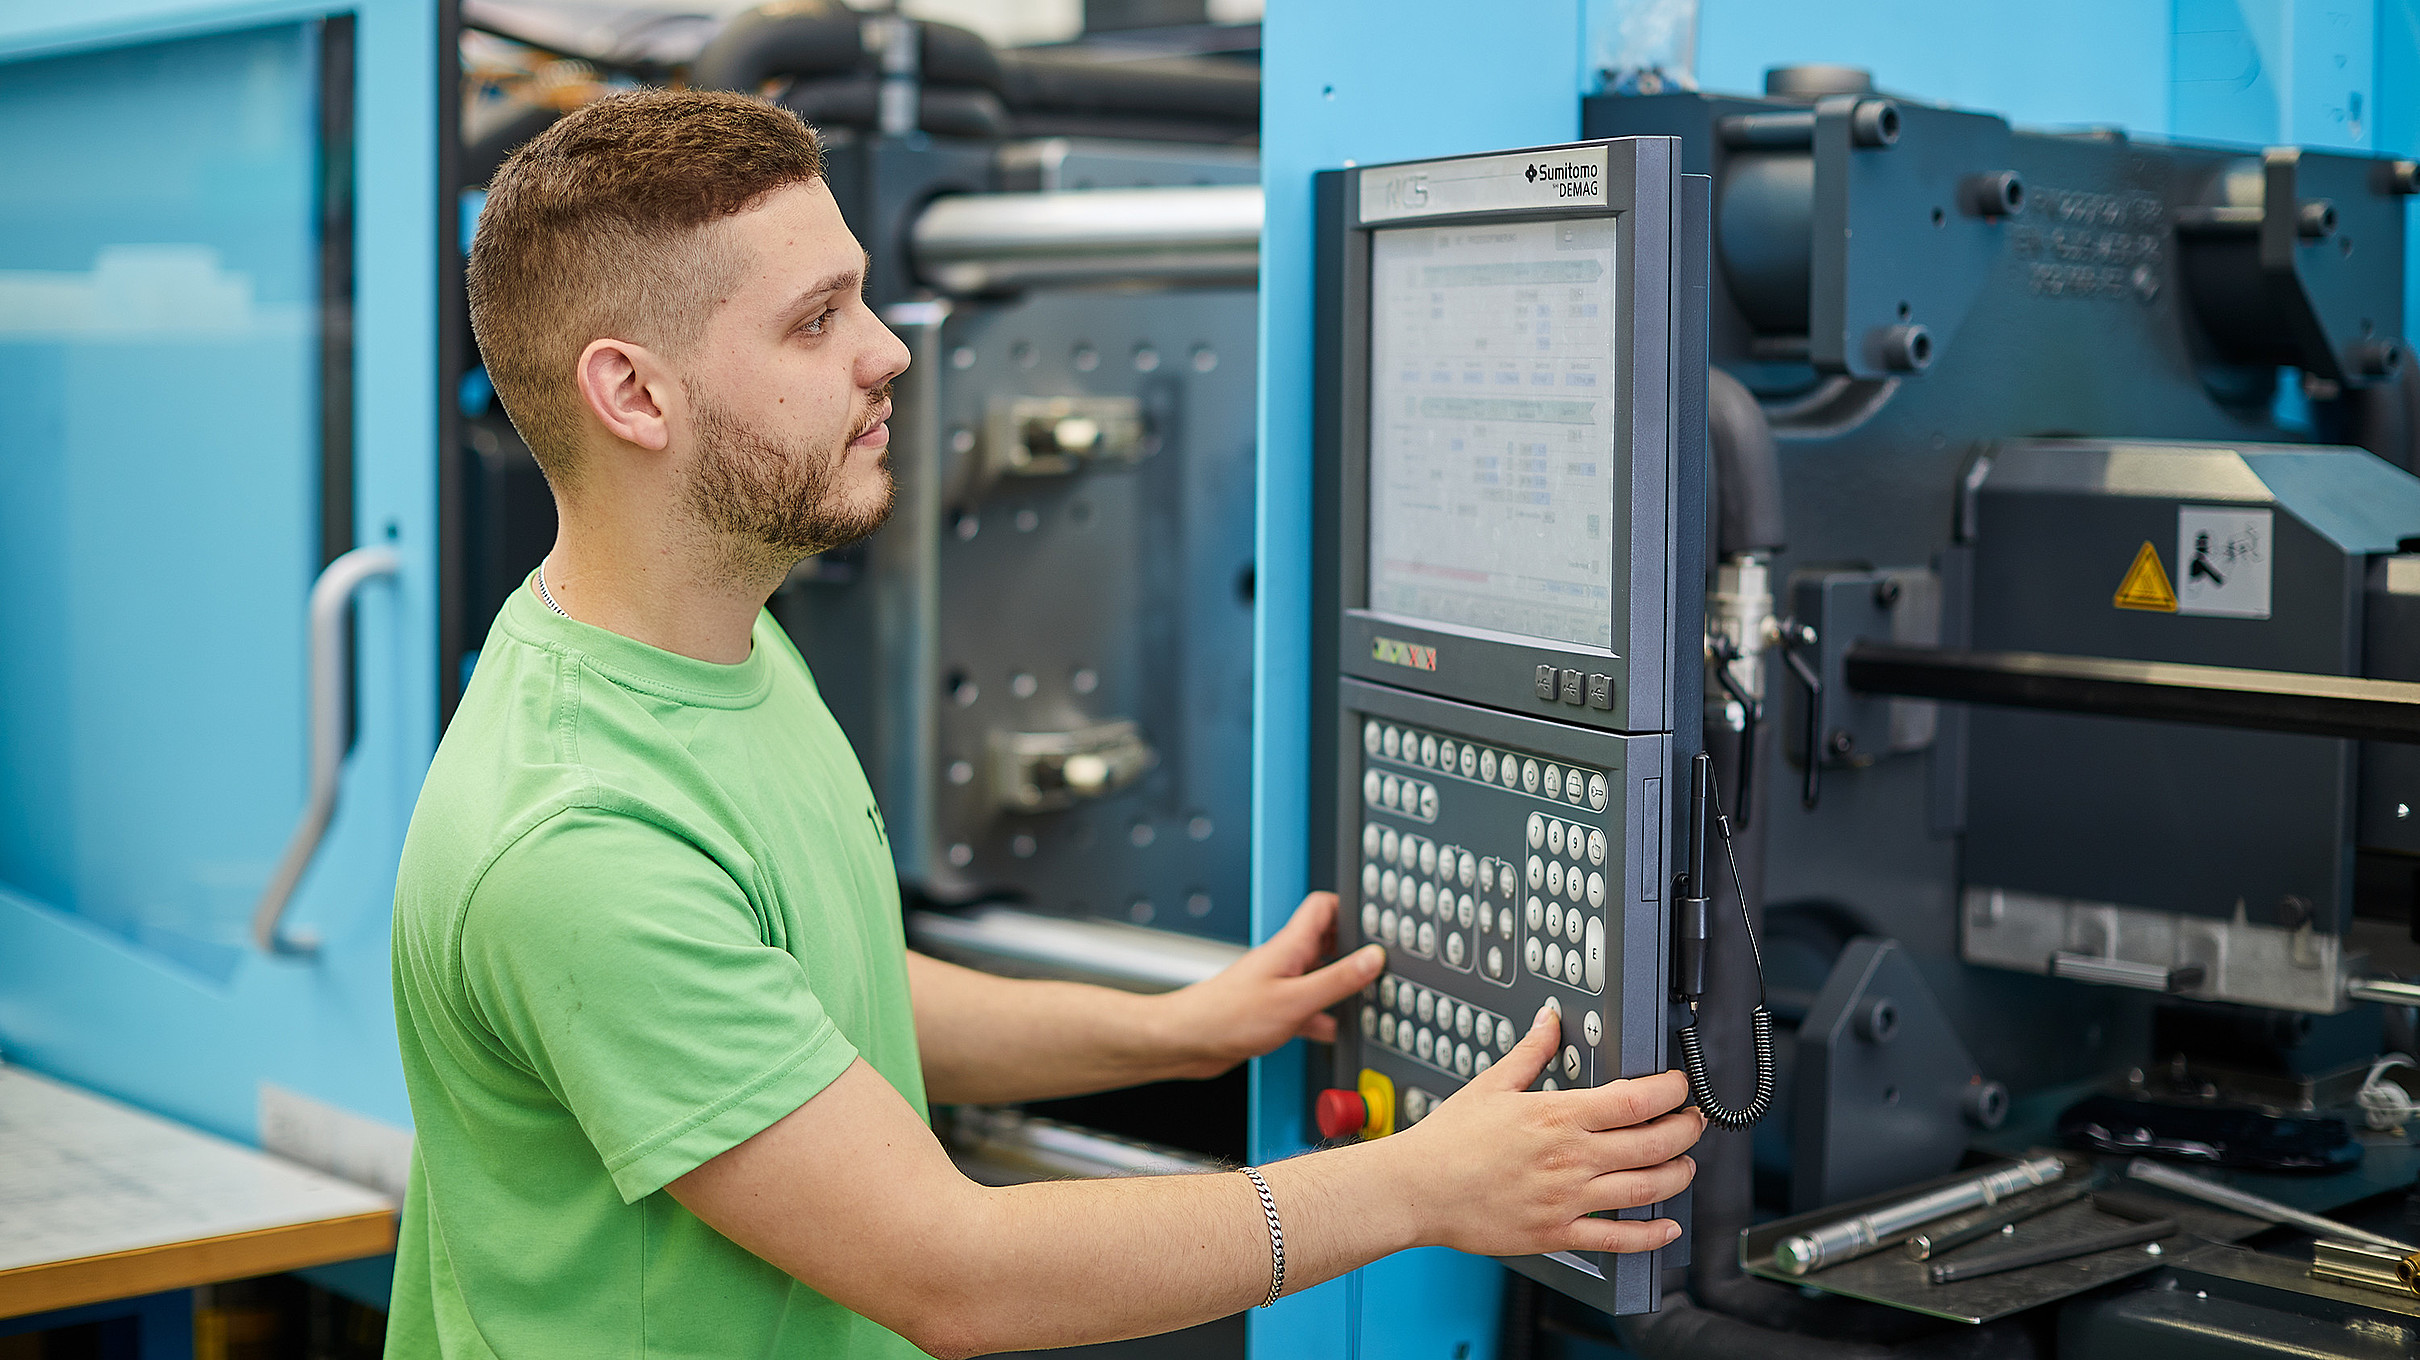 1zu1 employee in the programming of an injection molding machine